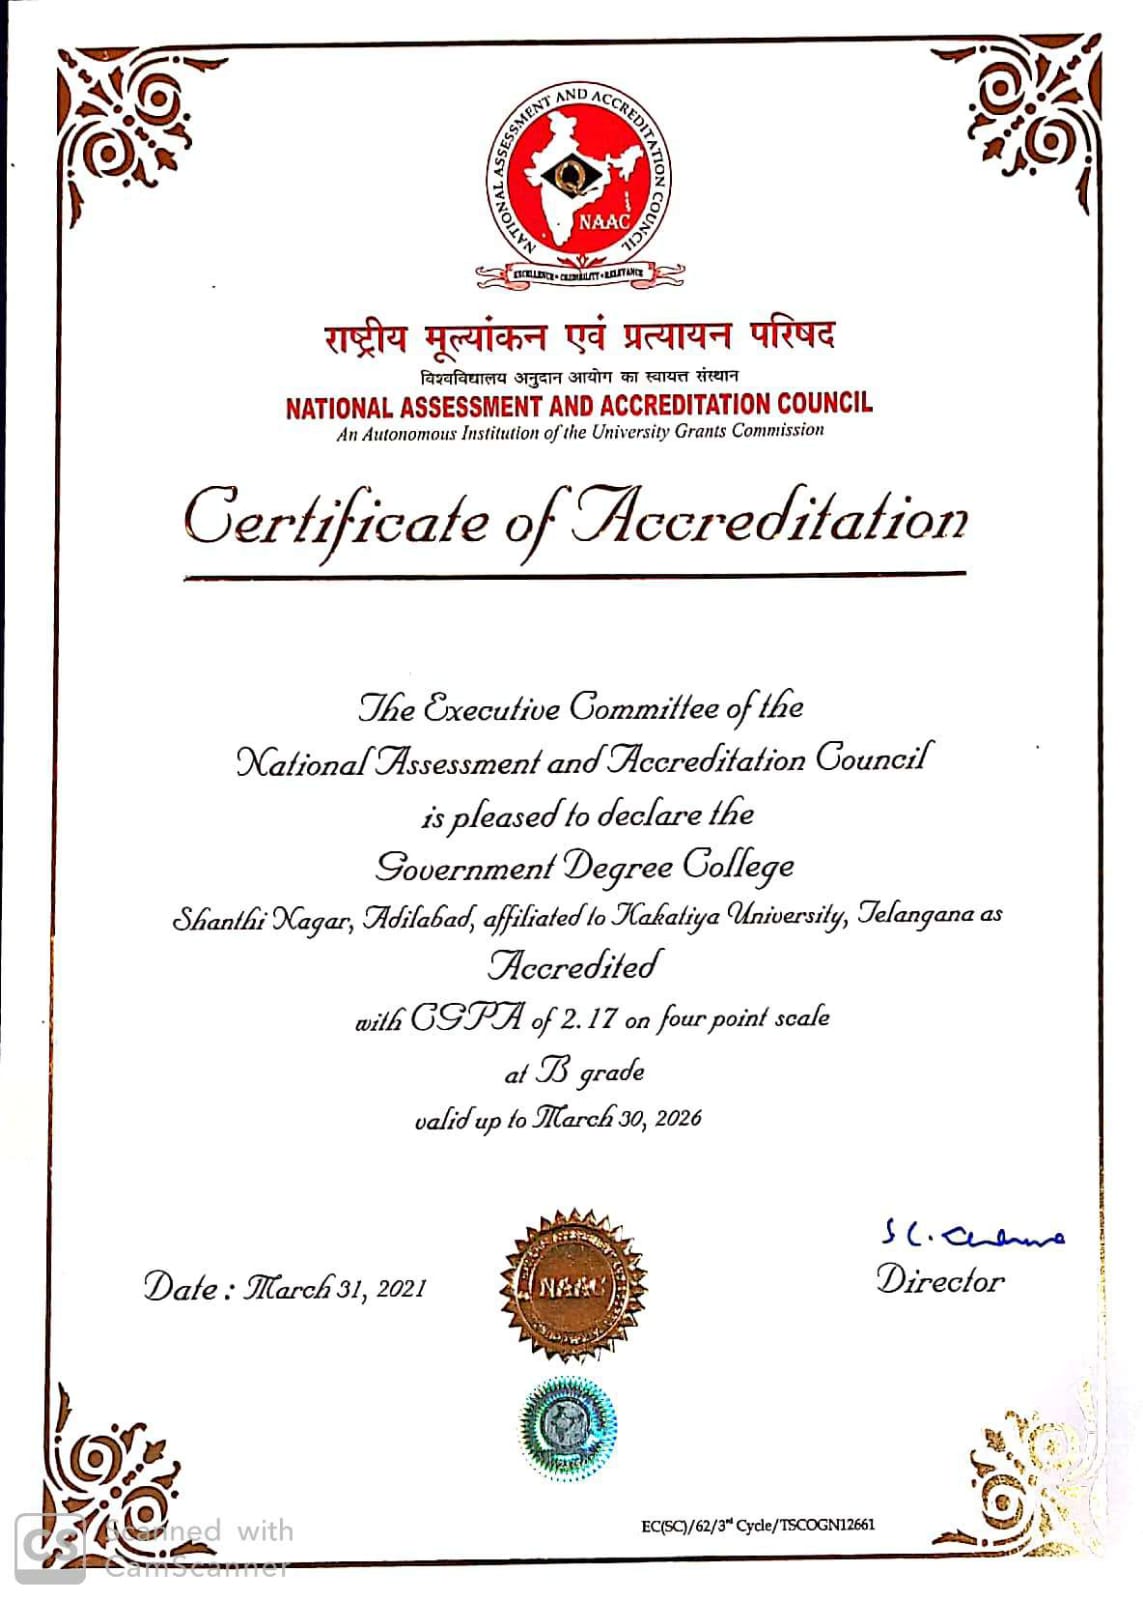 NAAC 3rd cycle certificate